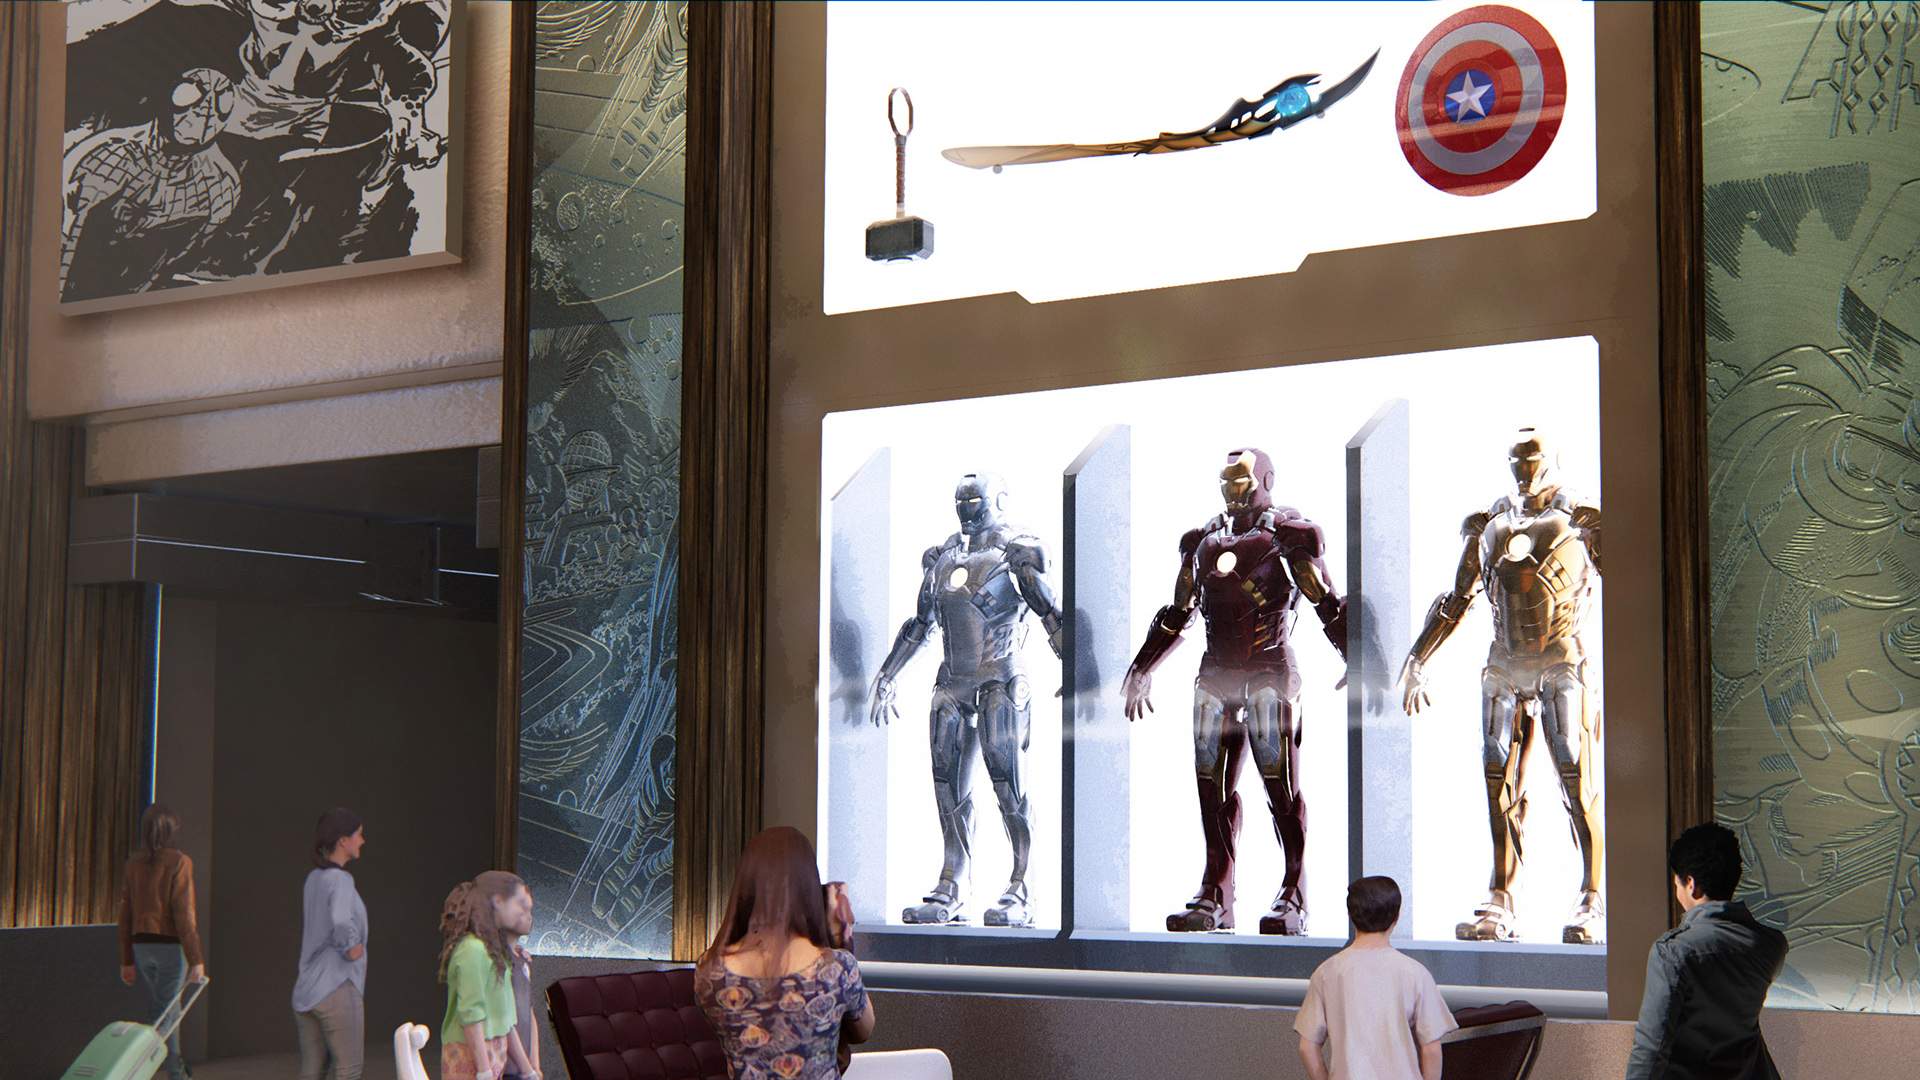 You'll Soon Be Able to Stay in the World's First Marvel Hotel